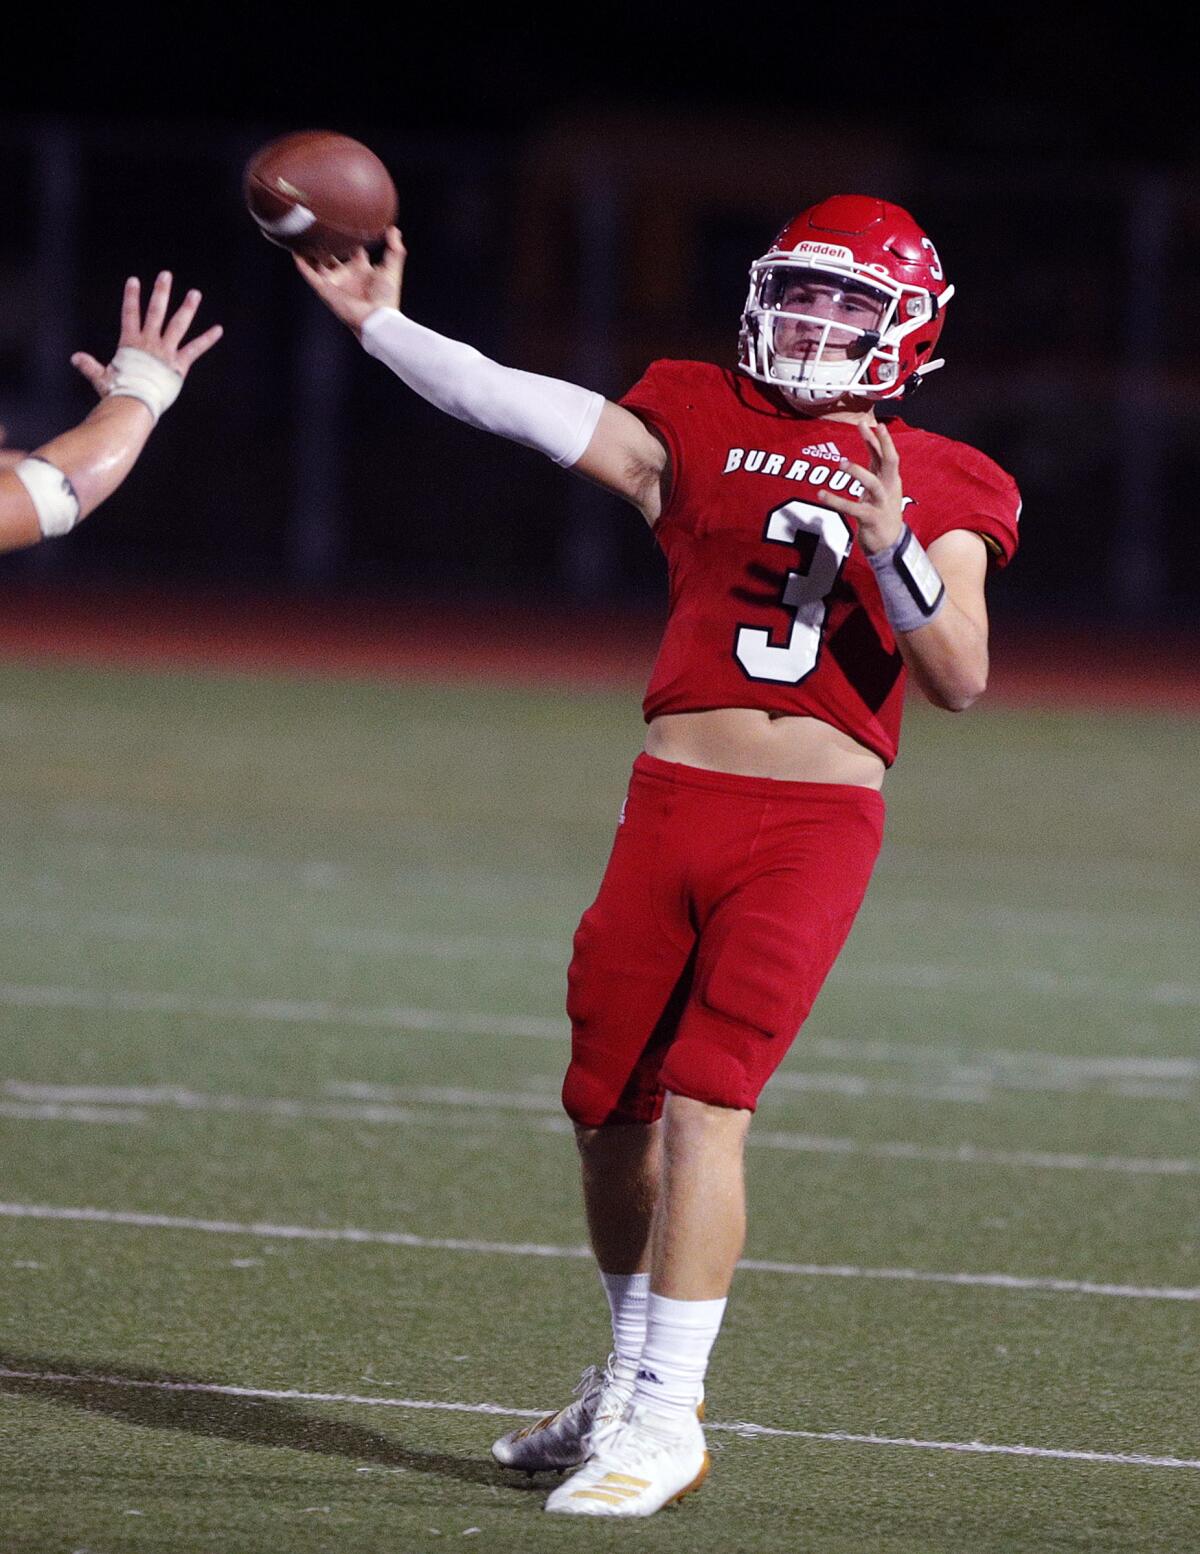 Burroughs' quarterback Nicholas Garcia falls back and passes against Crescenta Valley in a Pacific League football game at Memorial Field in Burbank on Tuesday, September 27, 2019.